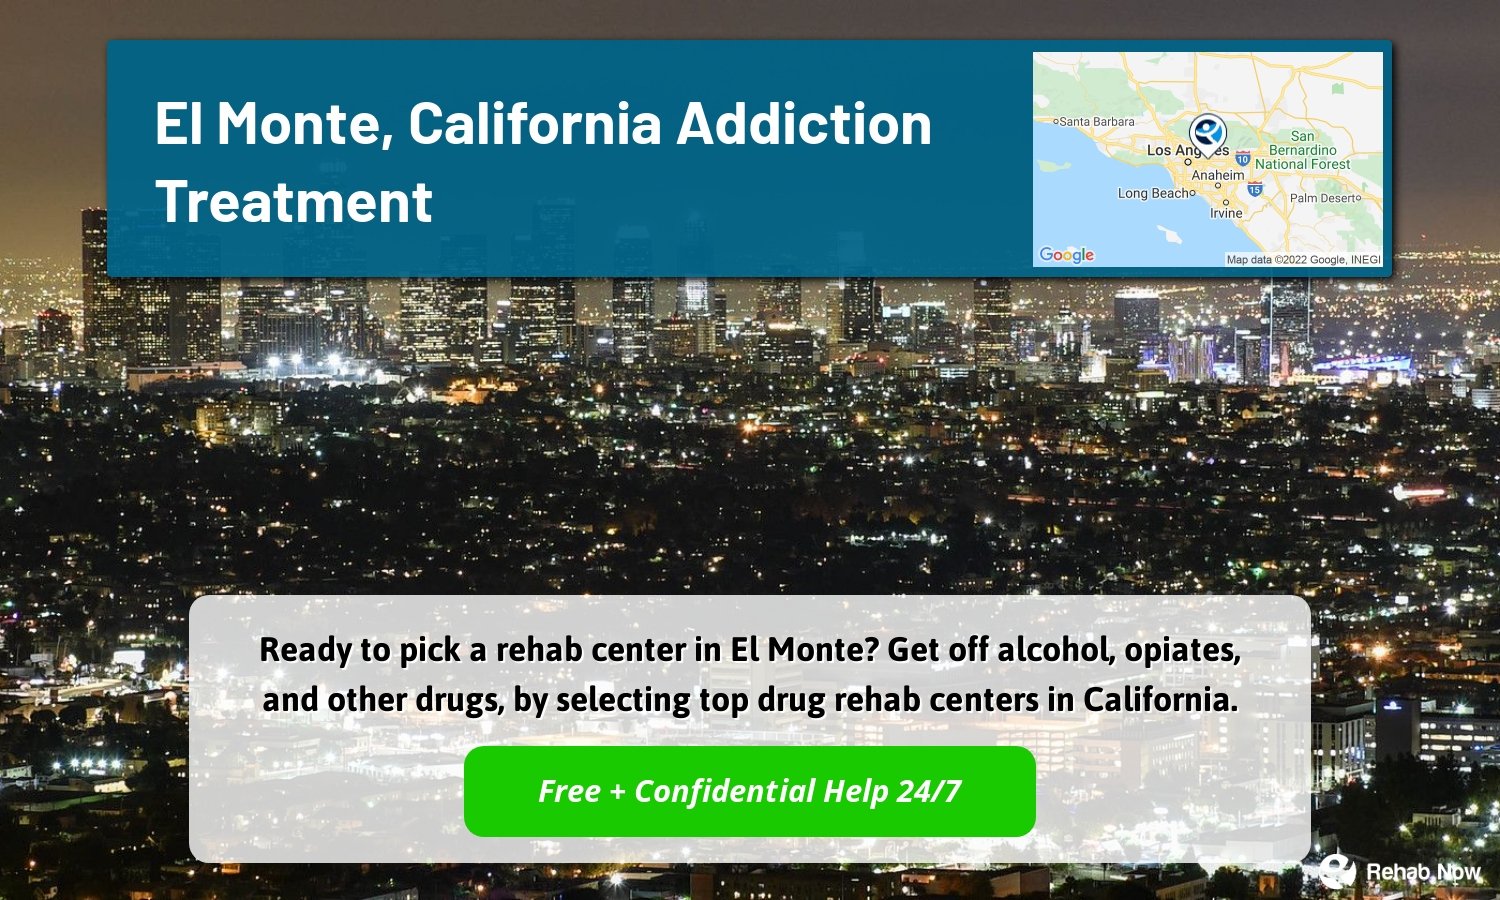 Ready to pick a rehab center in El Monte? Get off alcohol, opiates, and other drugs, by selecting top drug rehab centers in California.